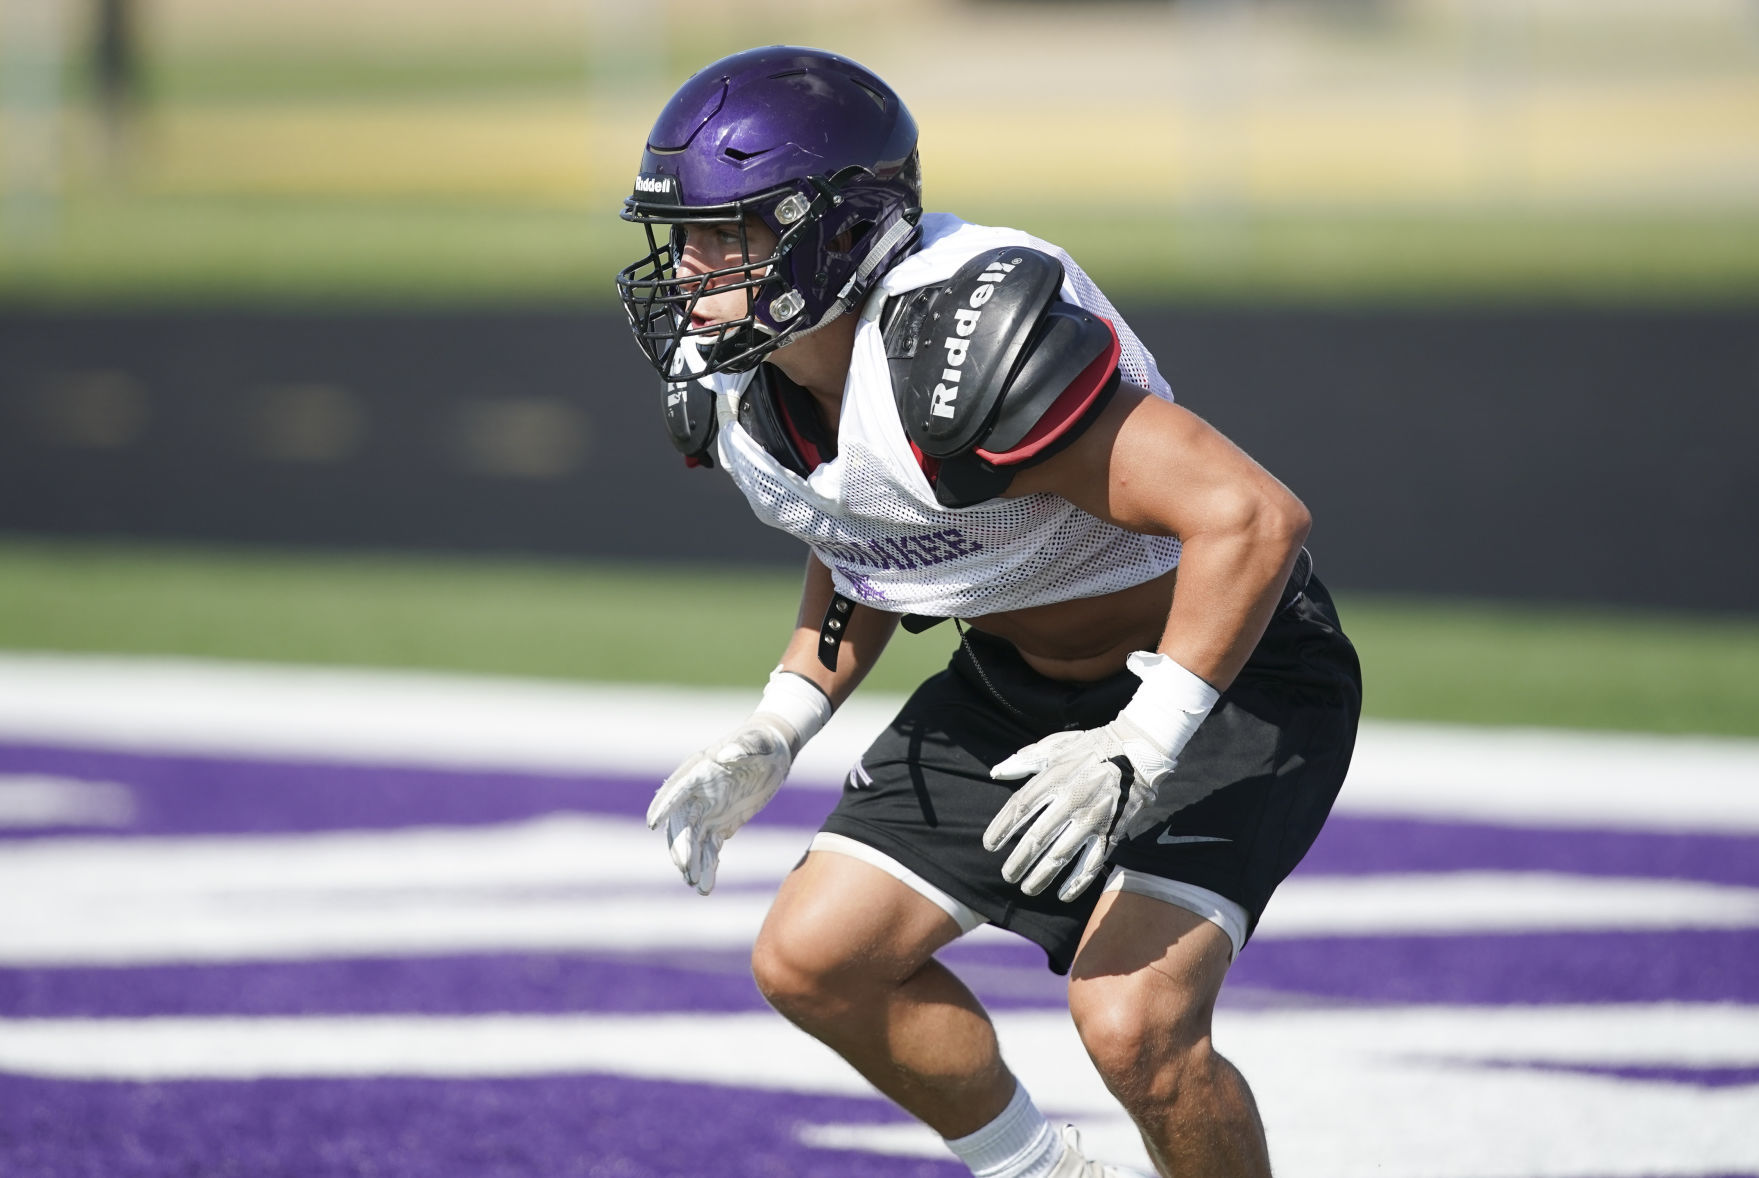 Prep football preview: Perennial power Waunakee hearing some